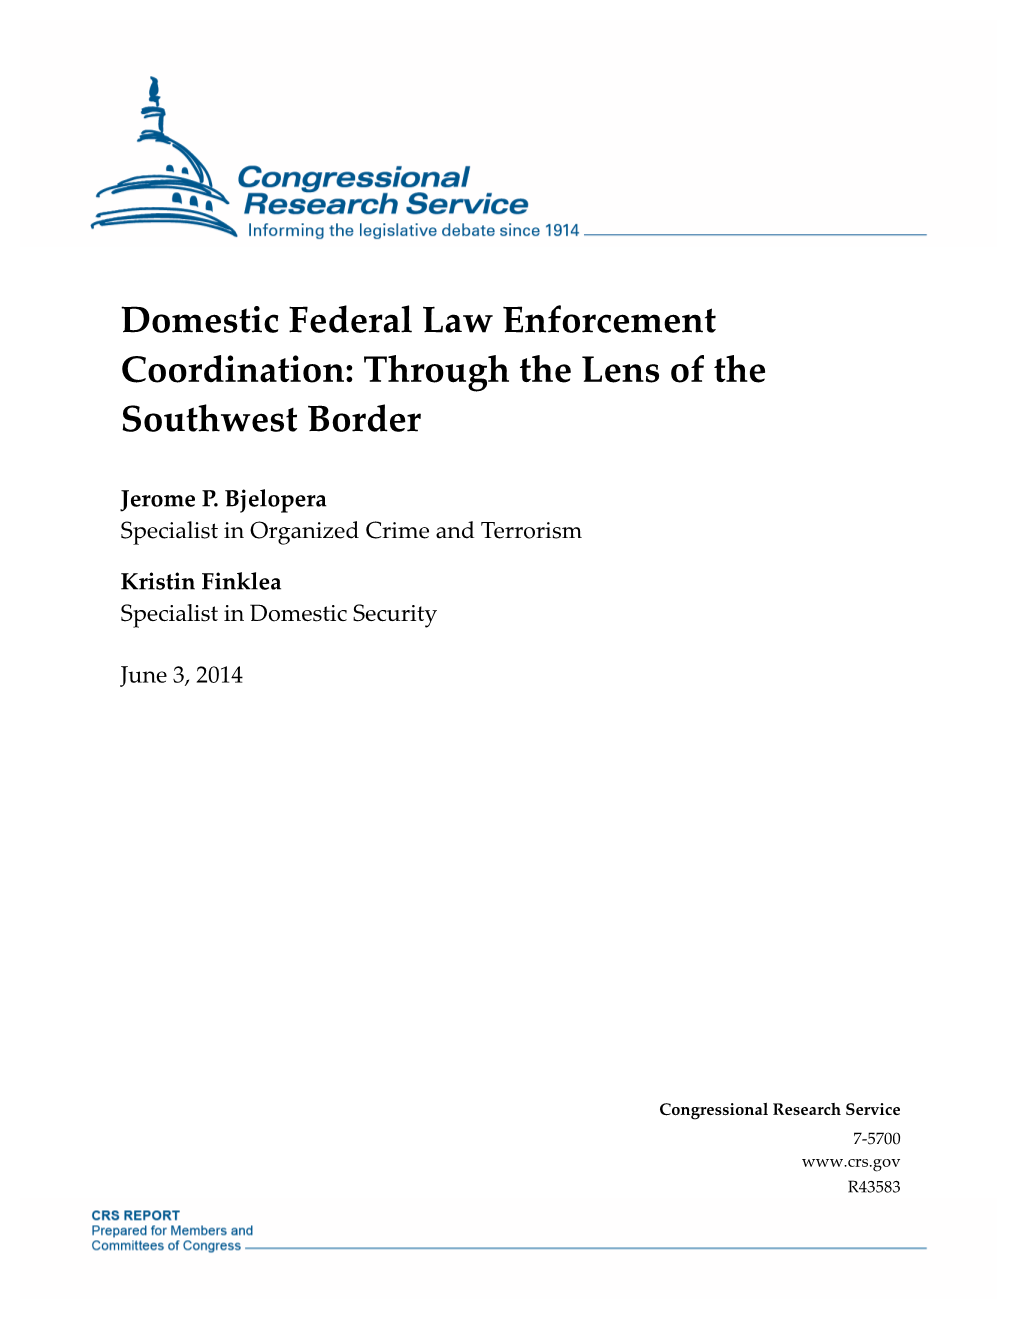 Domestic Federal Law Enforcement Coordination: Through the Lens of the Southwest Border